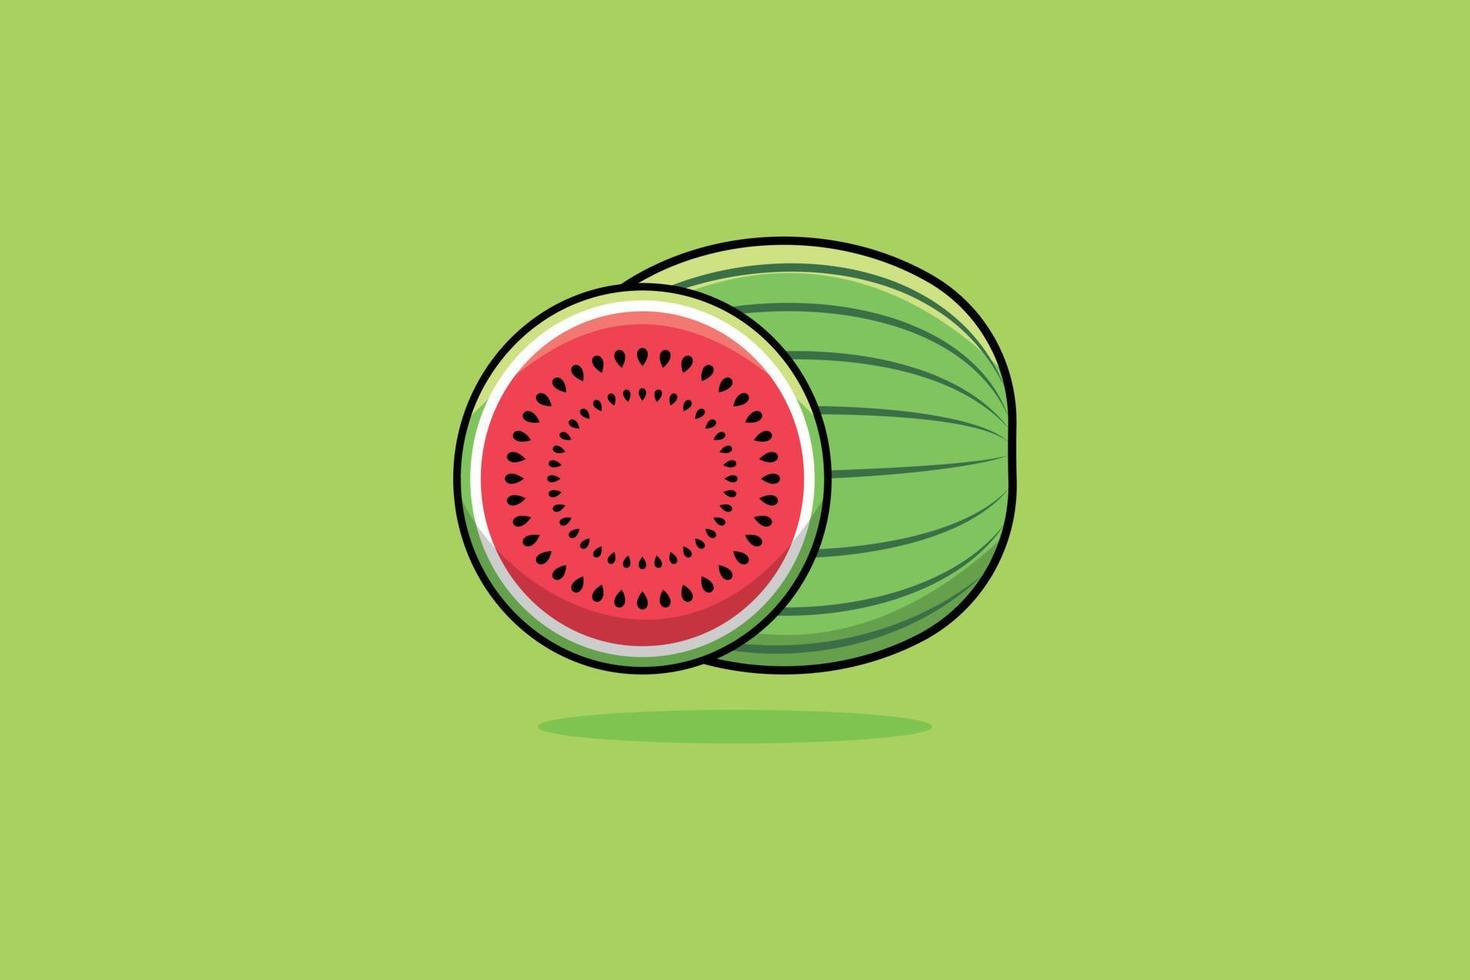 Water Melon fruit vector icon illustration. Watermelon and slice of watermelon. Fruit icon design concept. Fresh fruit, Healthy food, Health protection, Natural fruits, Body freshness, Organic food.